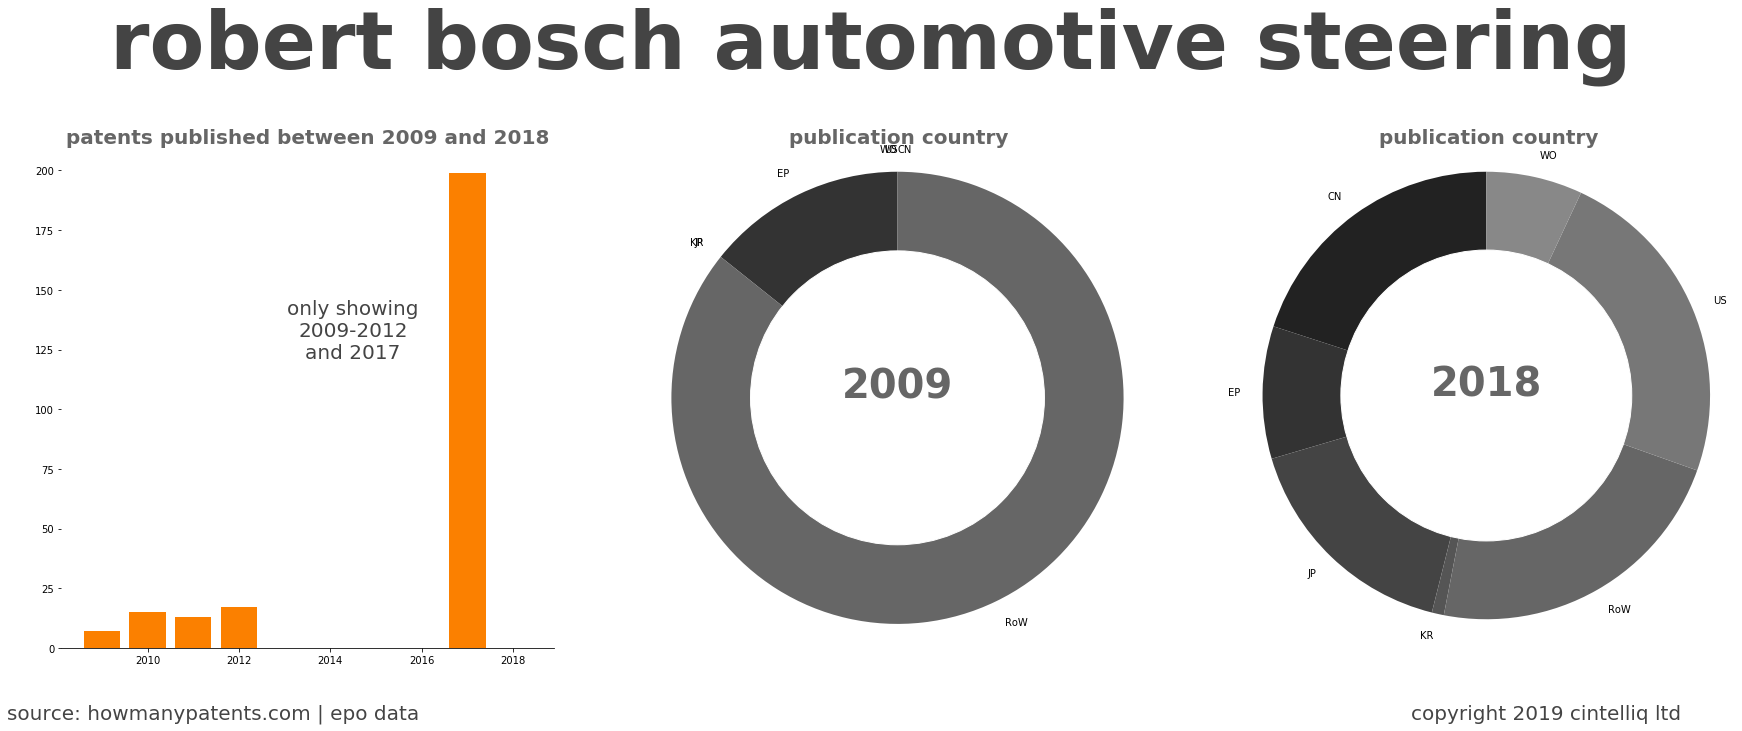 summary of patents for Robert Bosch Automotive Steering